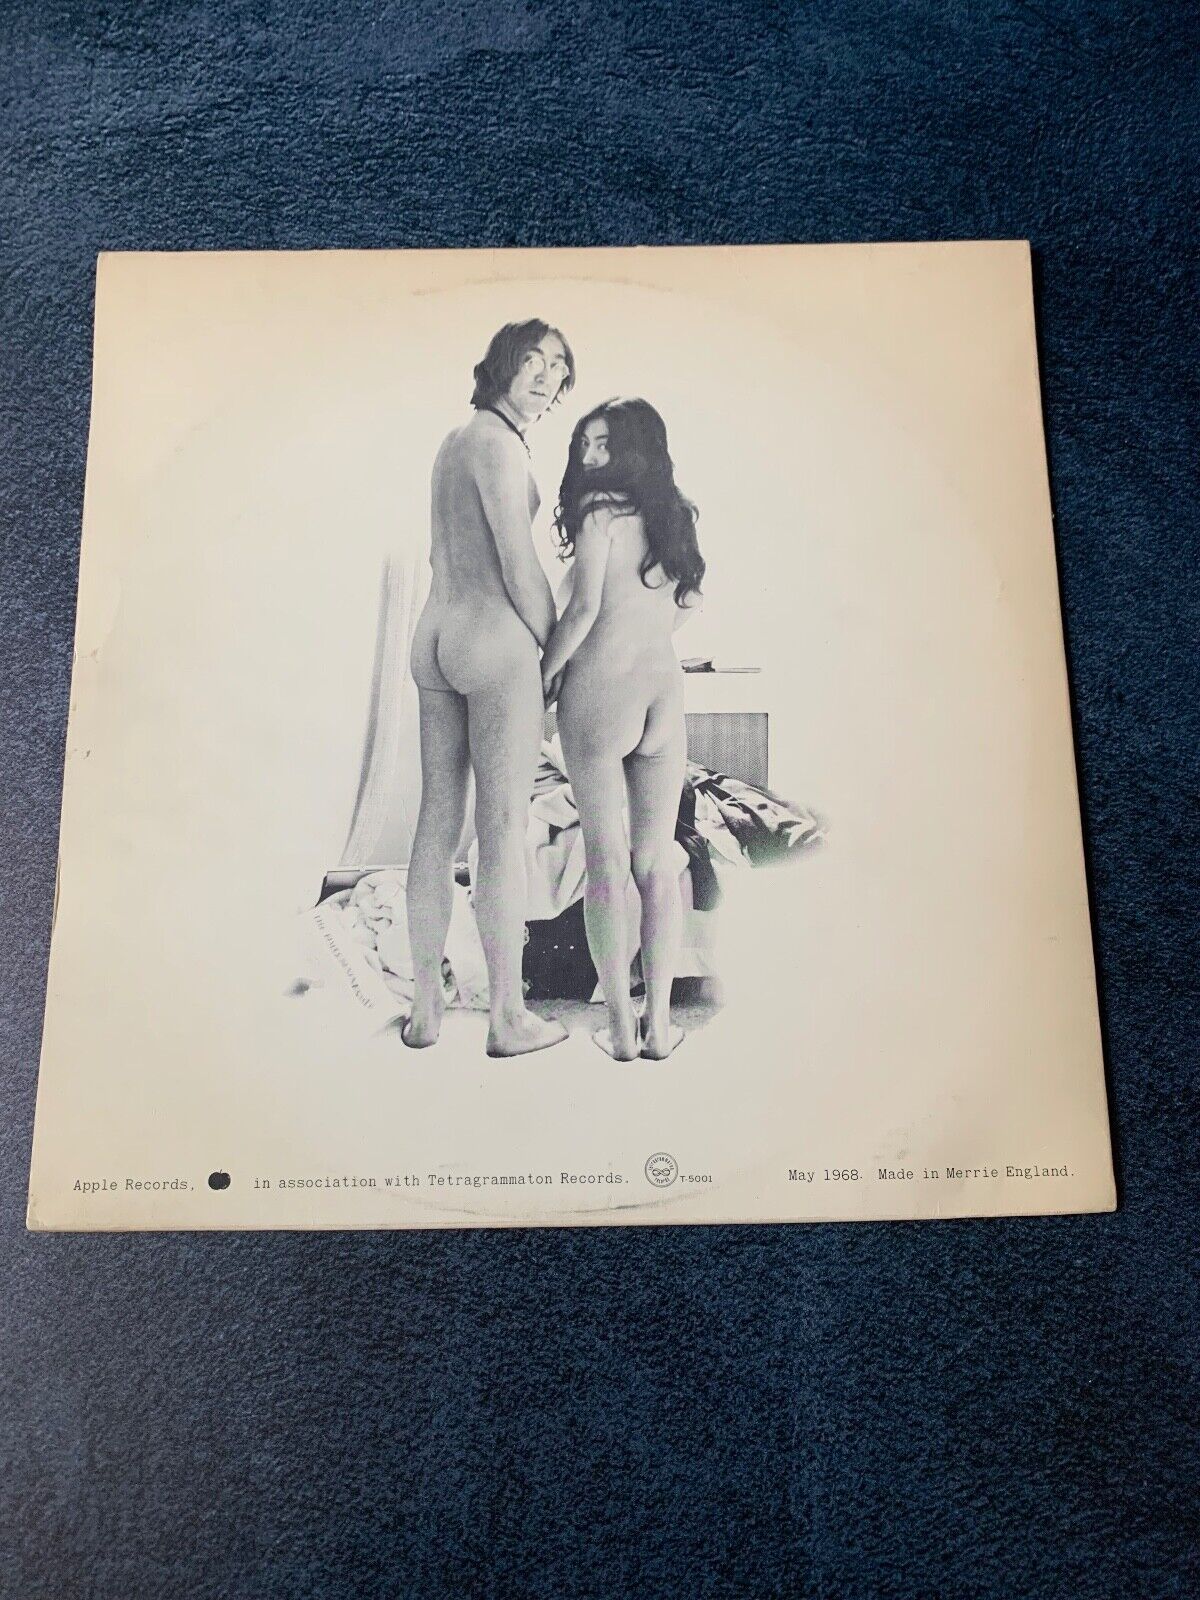 John Lennon & Yoko Ono  Unfinished Music, No. 1: Two Virgins LP 1968 Nude Cover